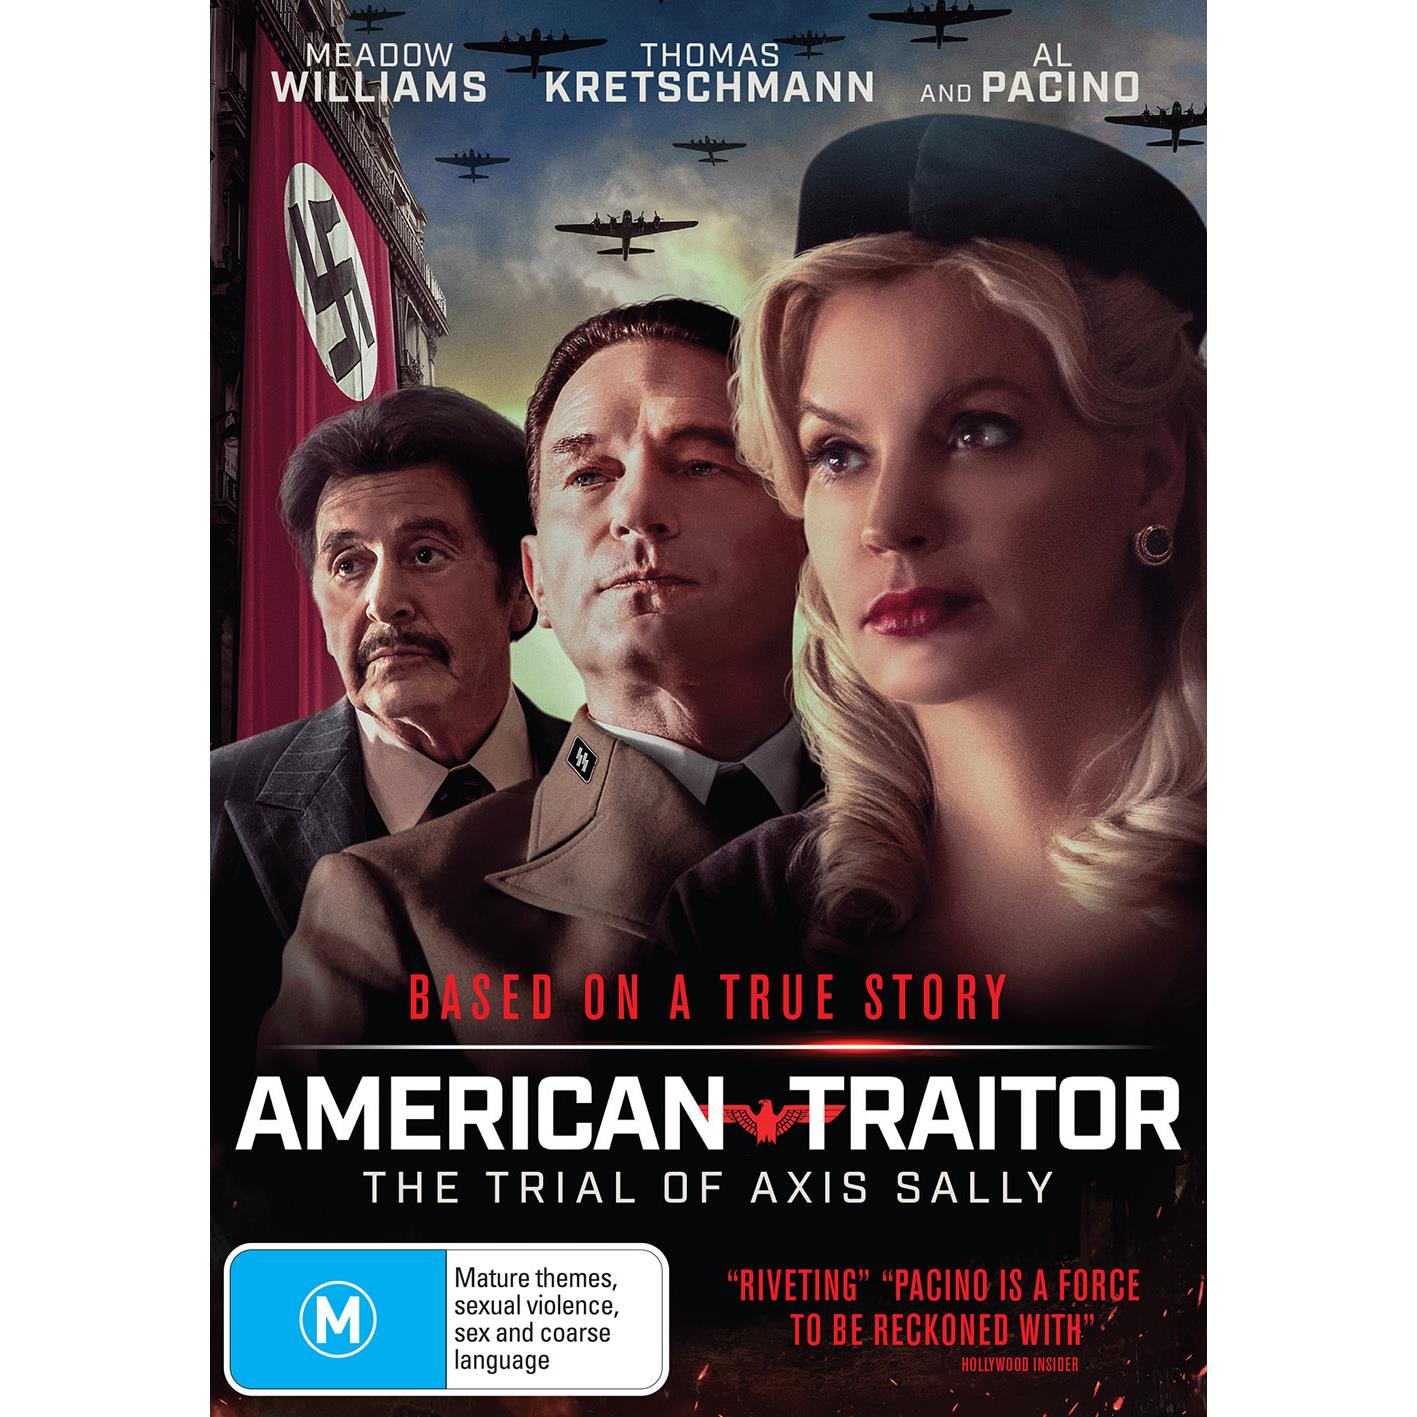 american traitor: the trial of axis sally